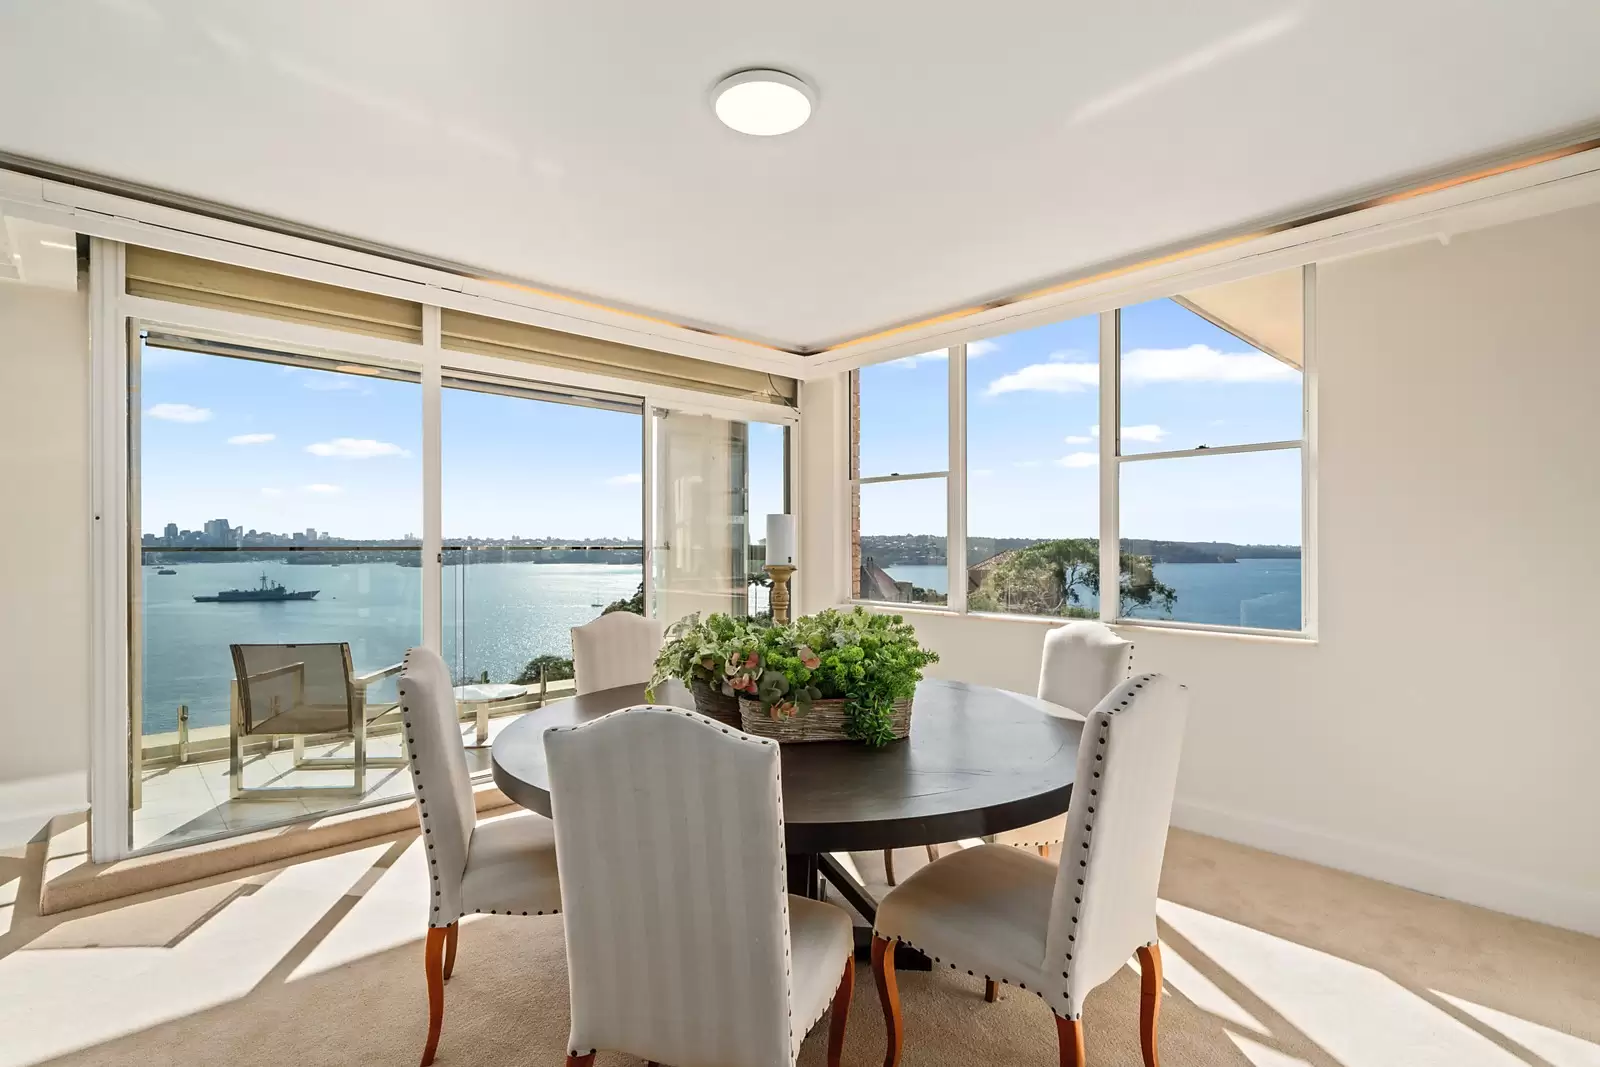 Photo #5: 13/8 Wentworth Street, Point Piper - Sold by Sydney Sotheby's International Realty